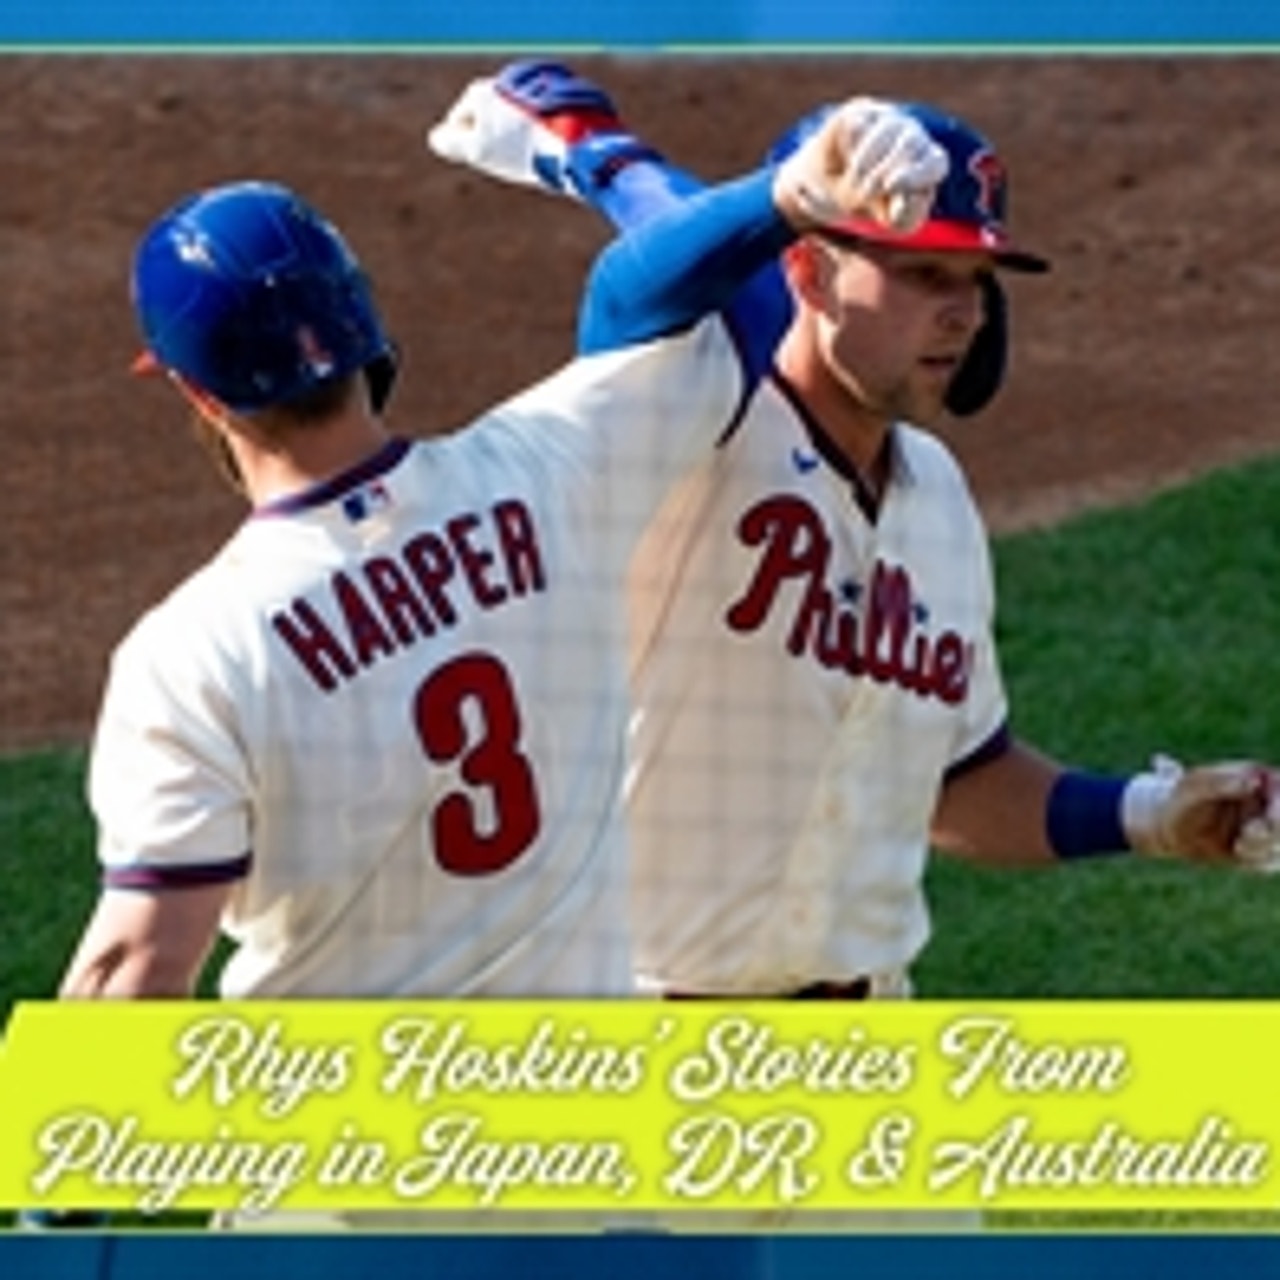 Rhys Hoskins details playing baseball in Japan, Dominican Republic